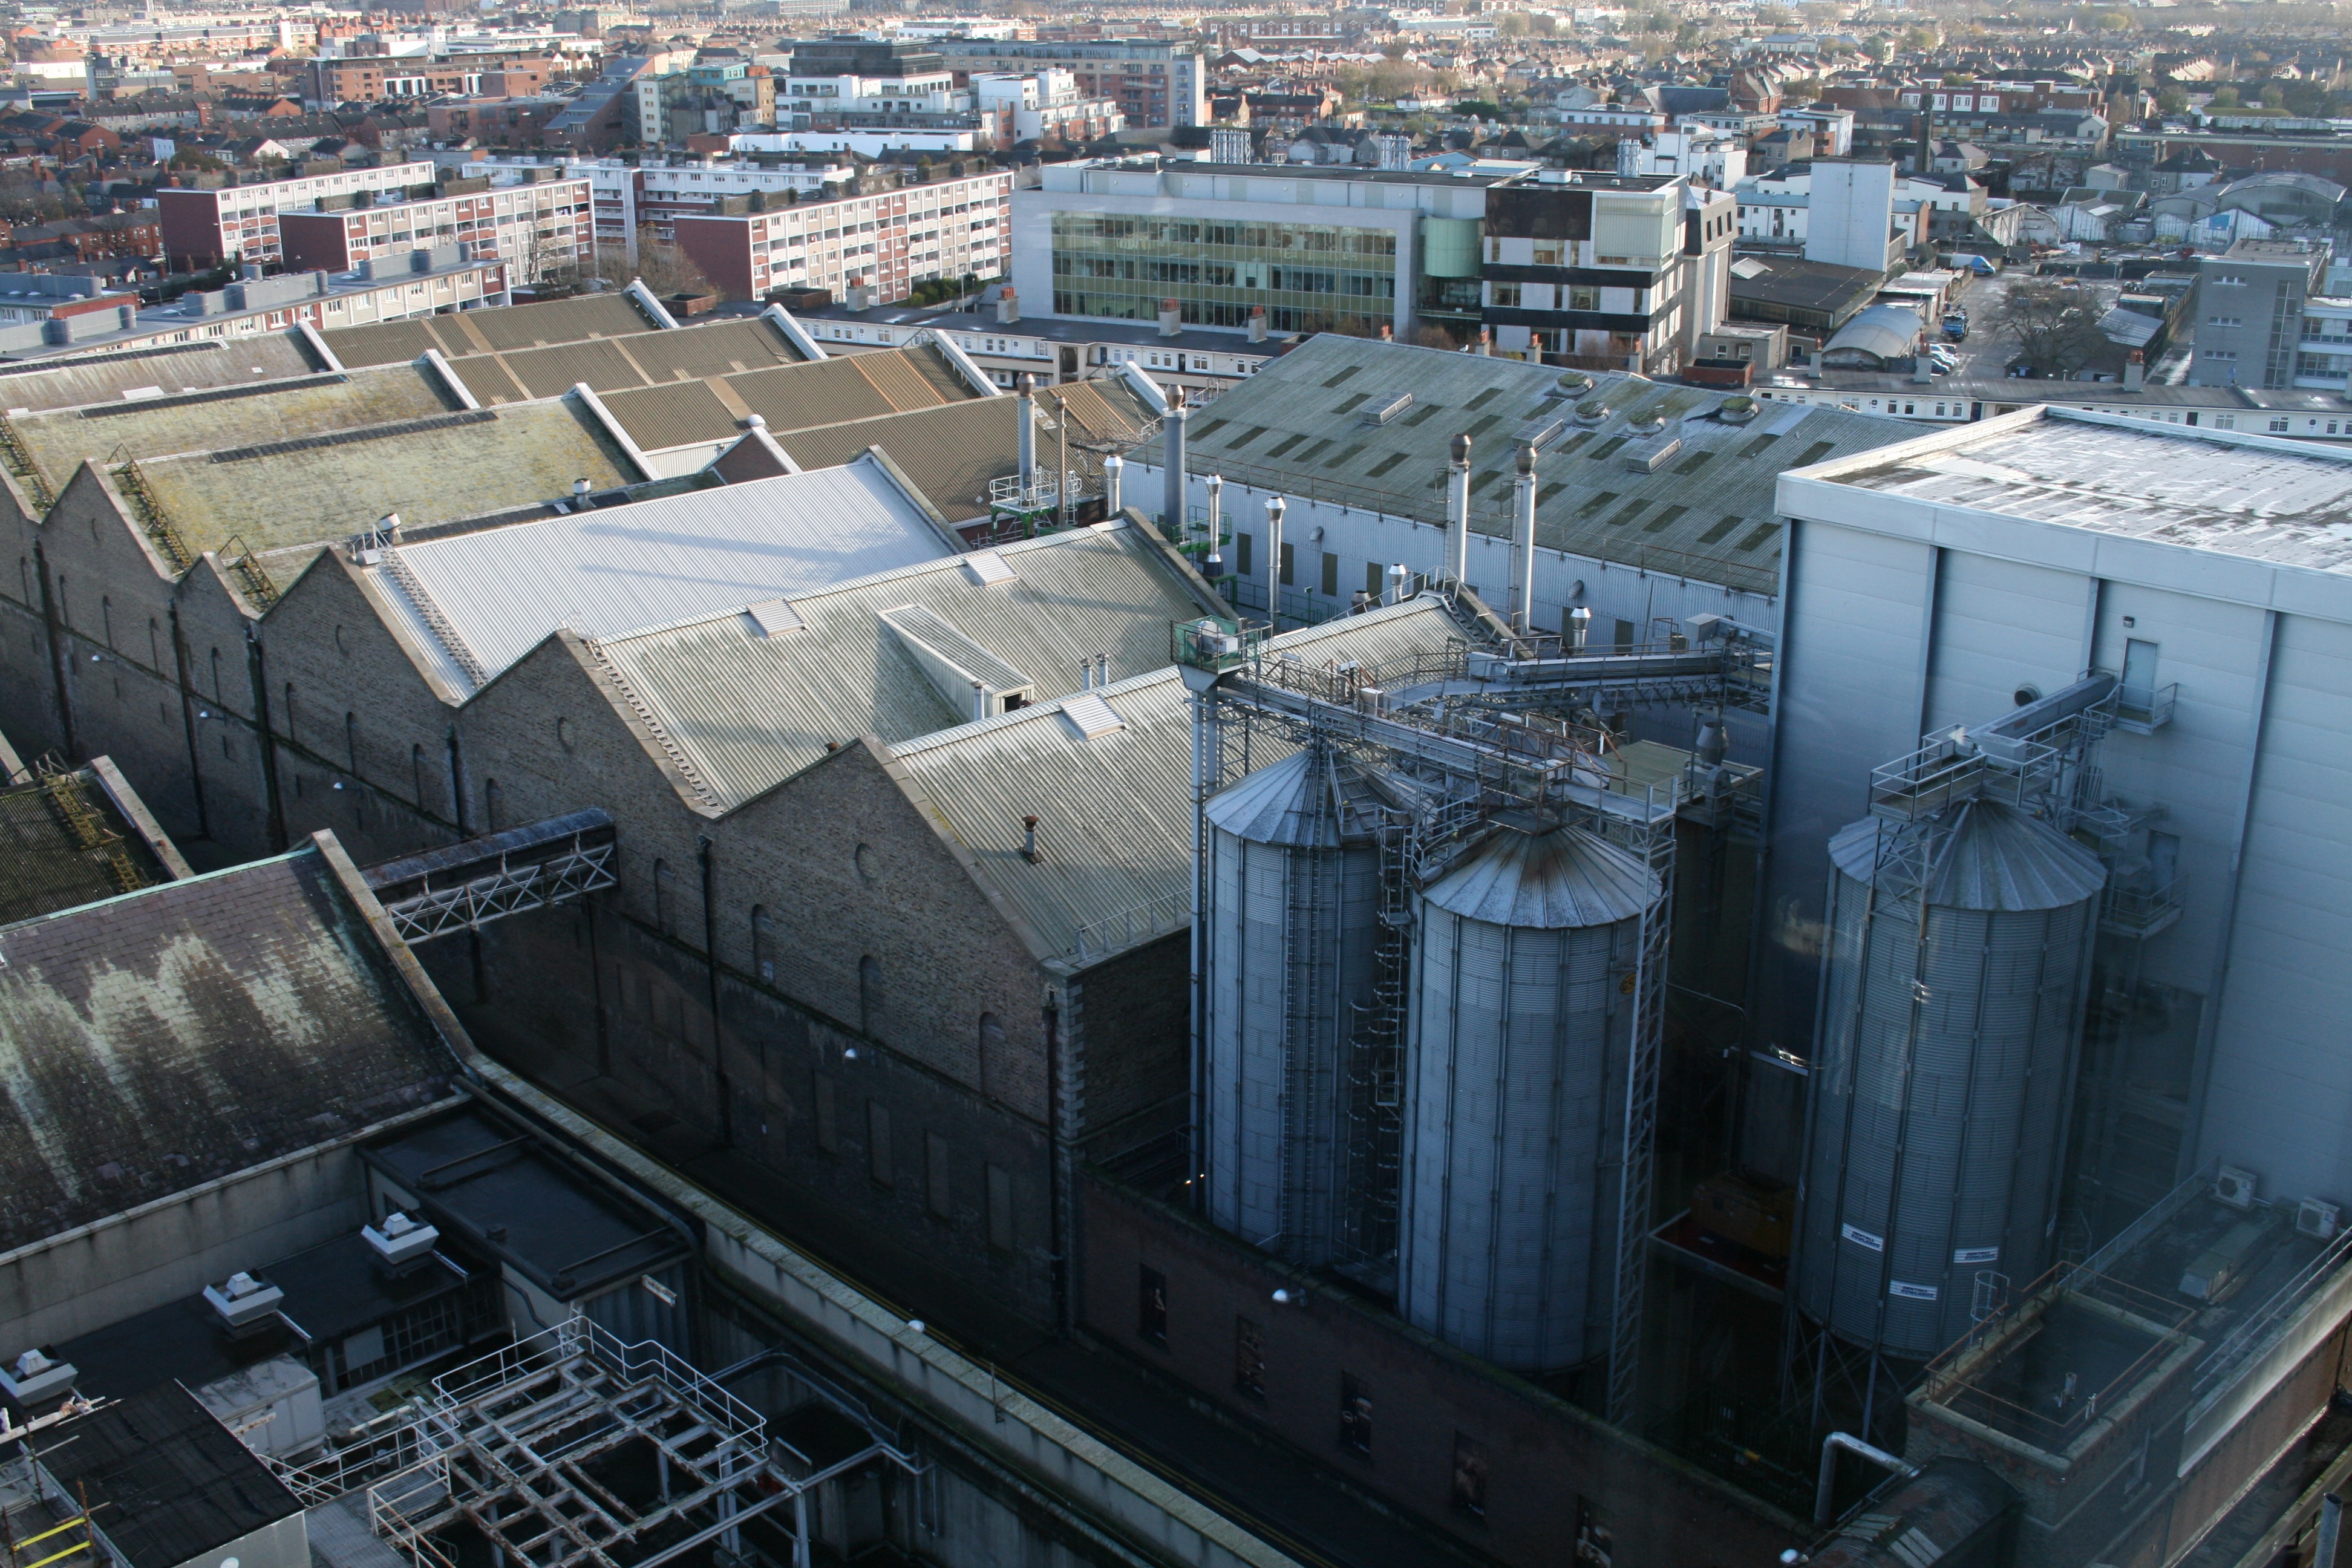 Another view of the Guinness Brewery from the Gravity Bar.